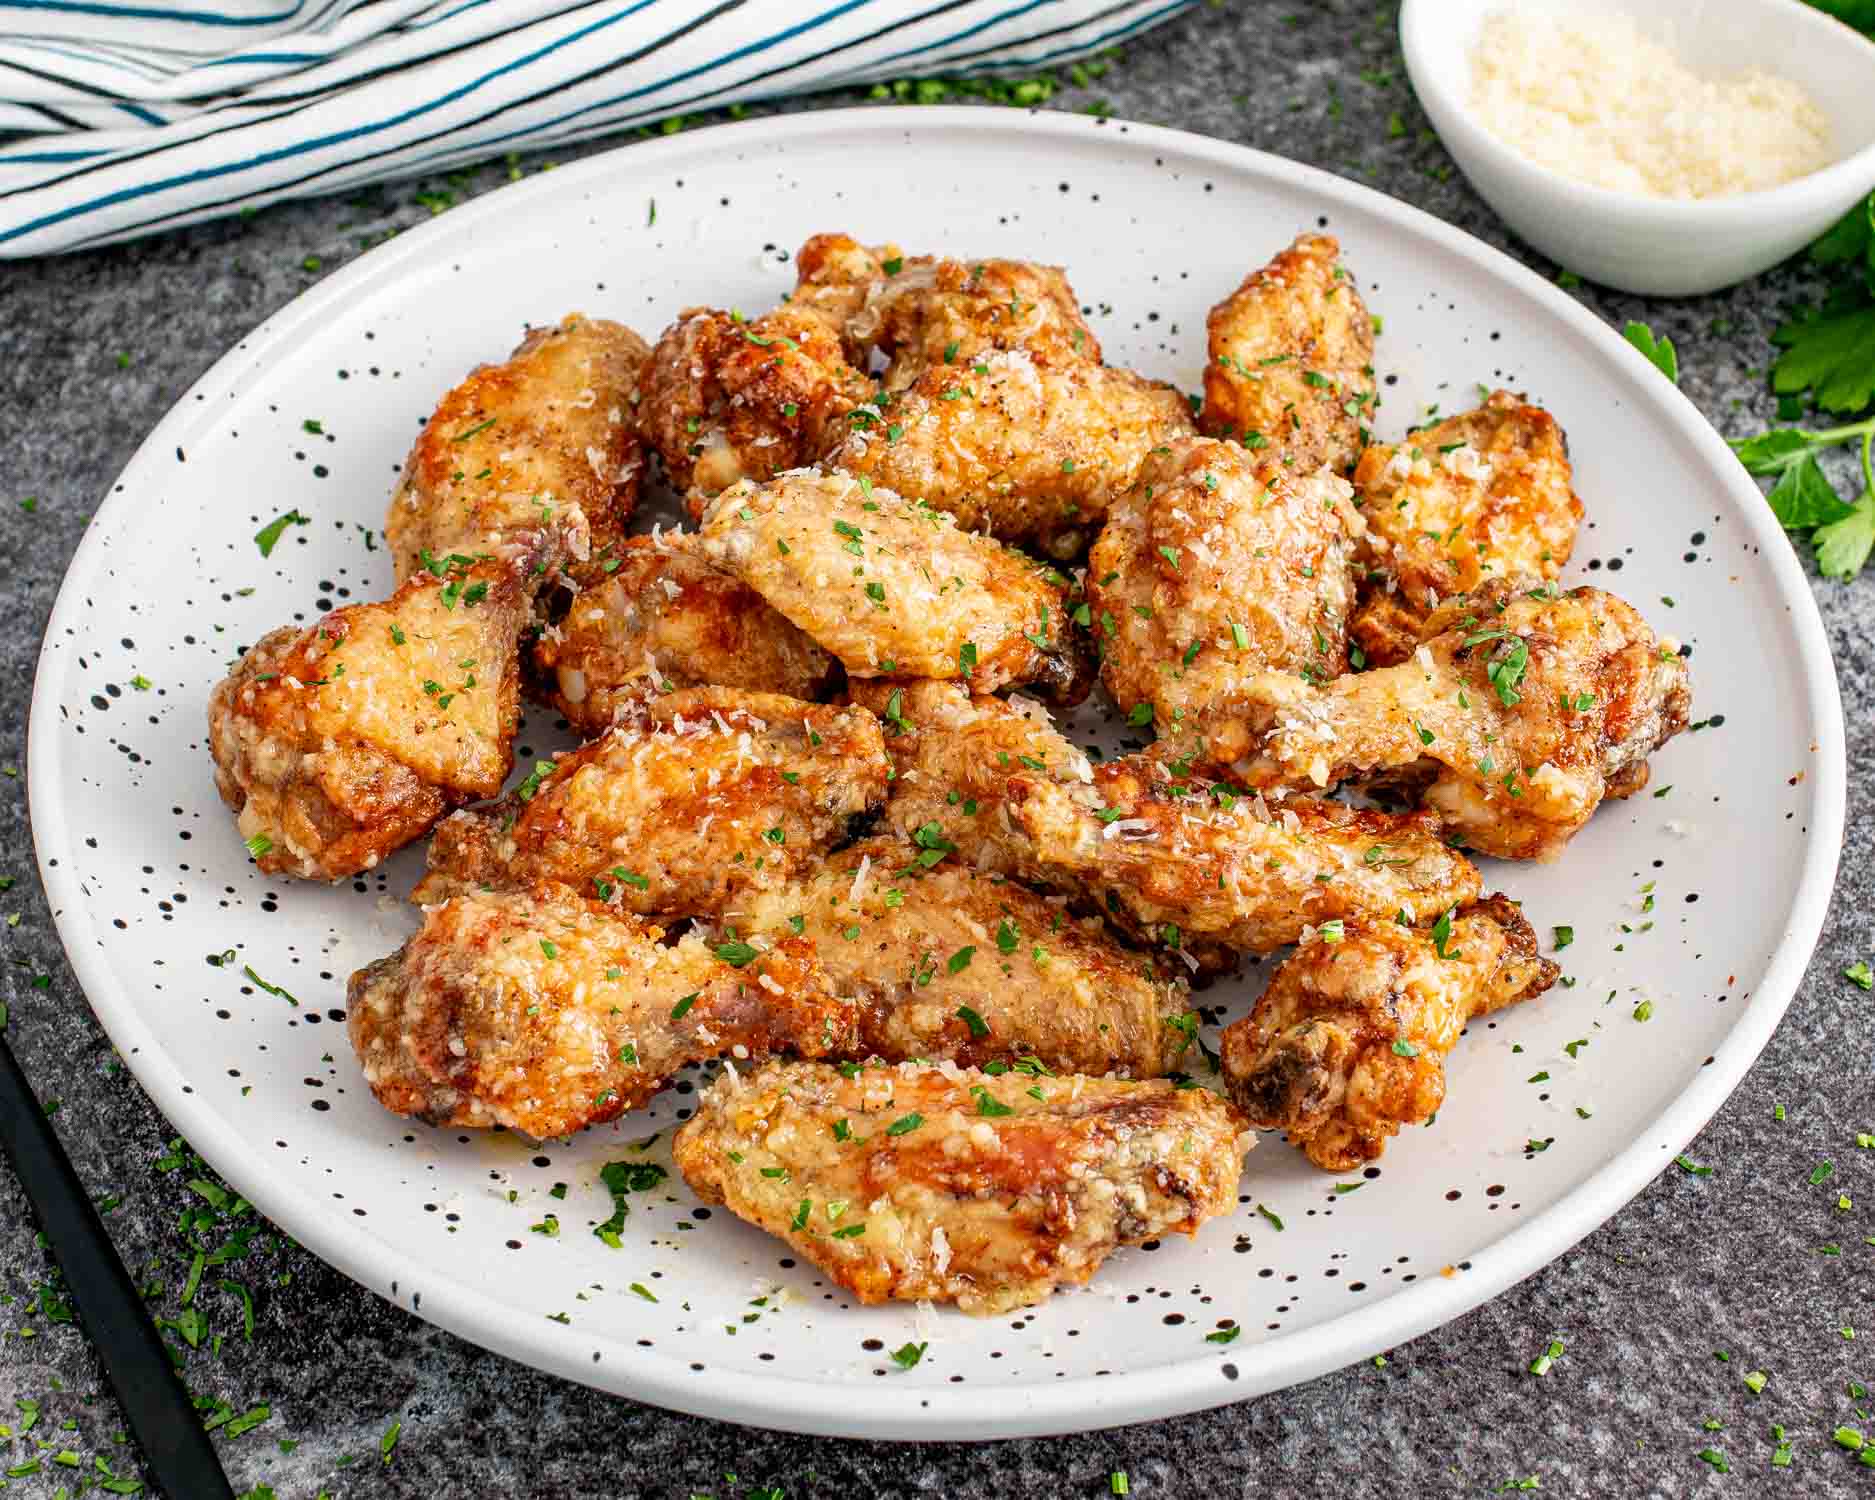 freshly made garlic parmesan wings on a white plate.